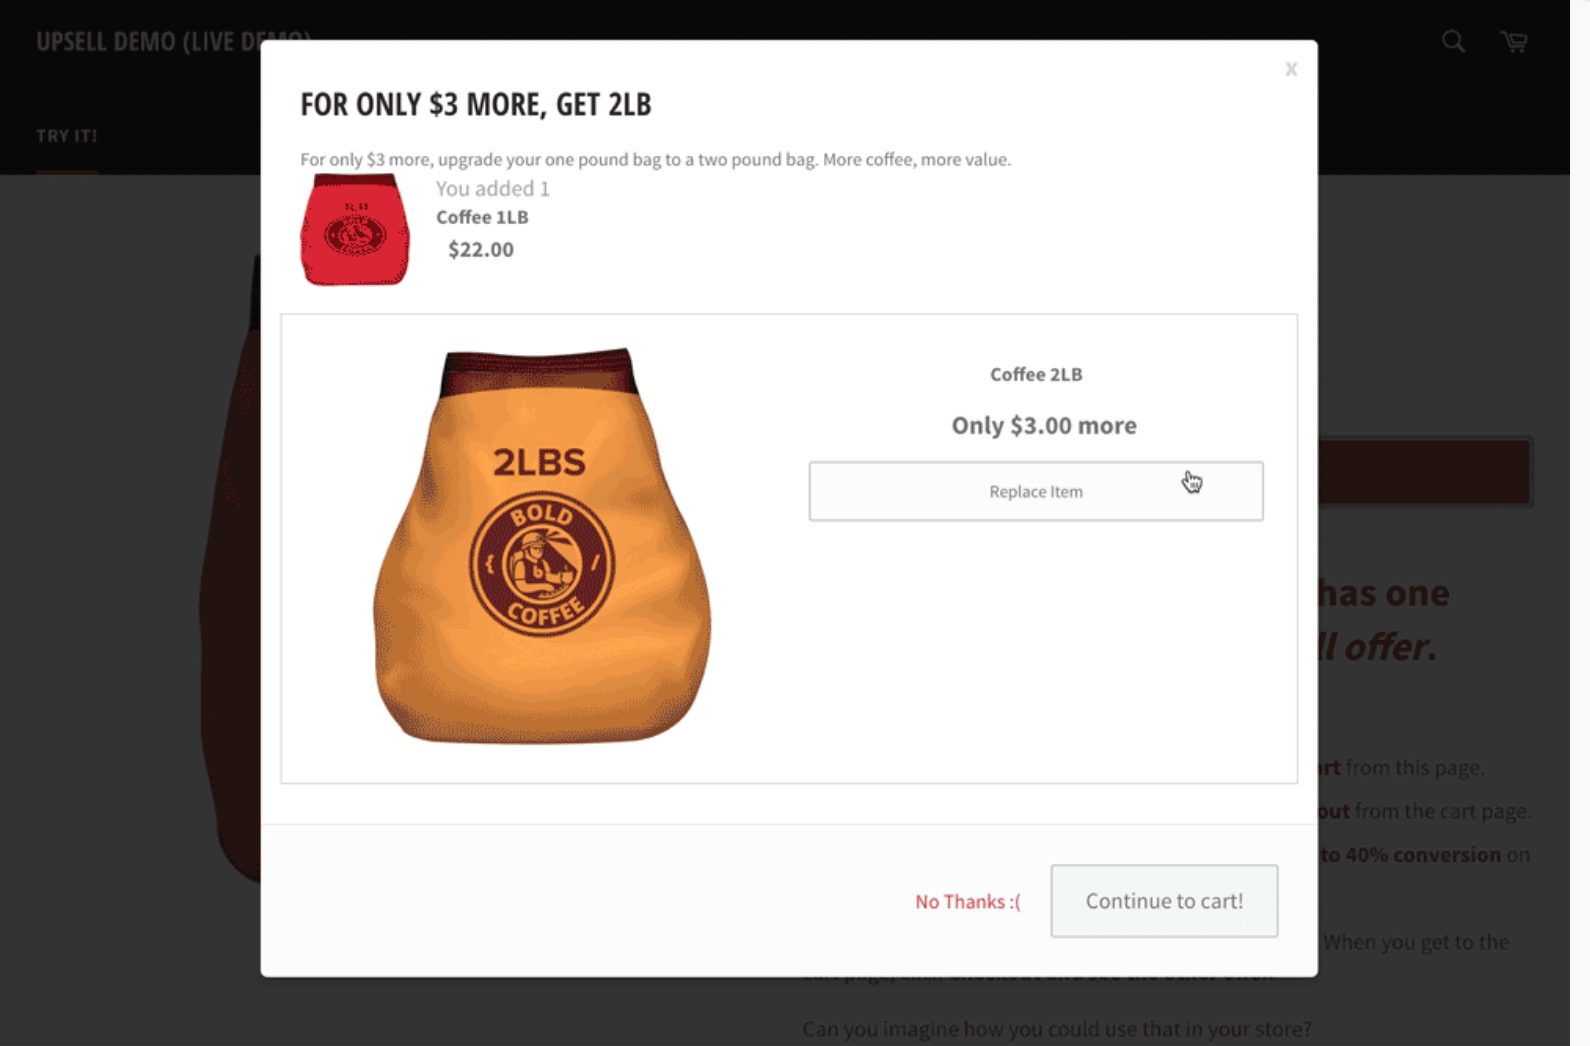 Screenshot showing a coffee bag for sale